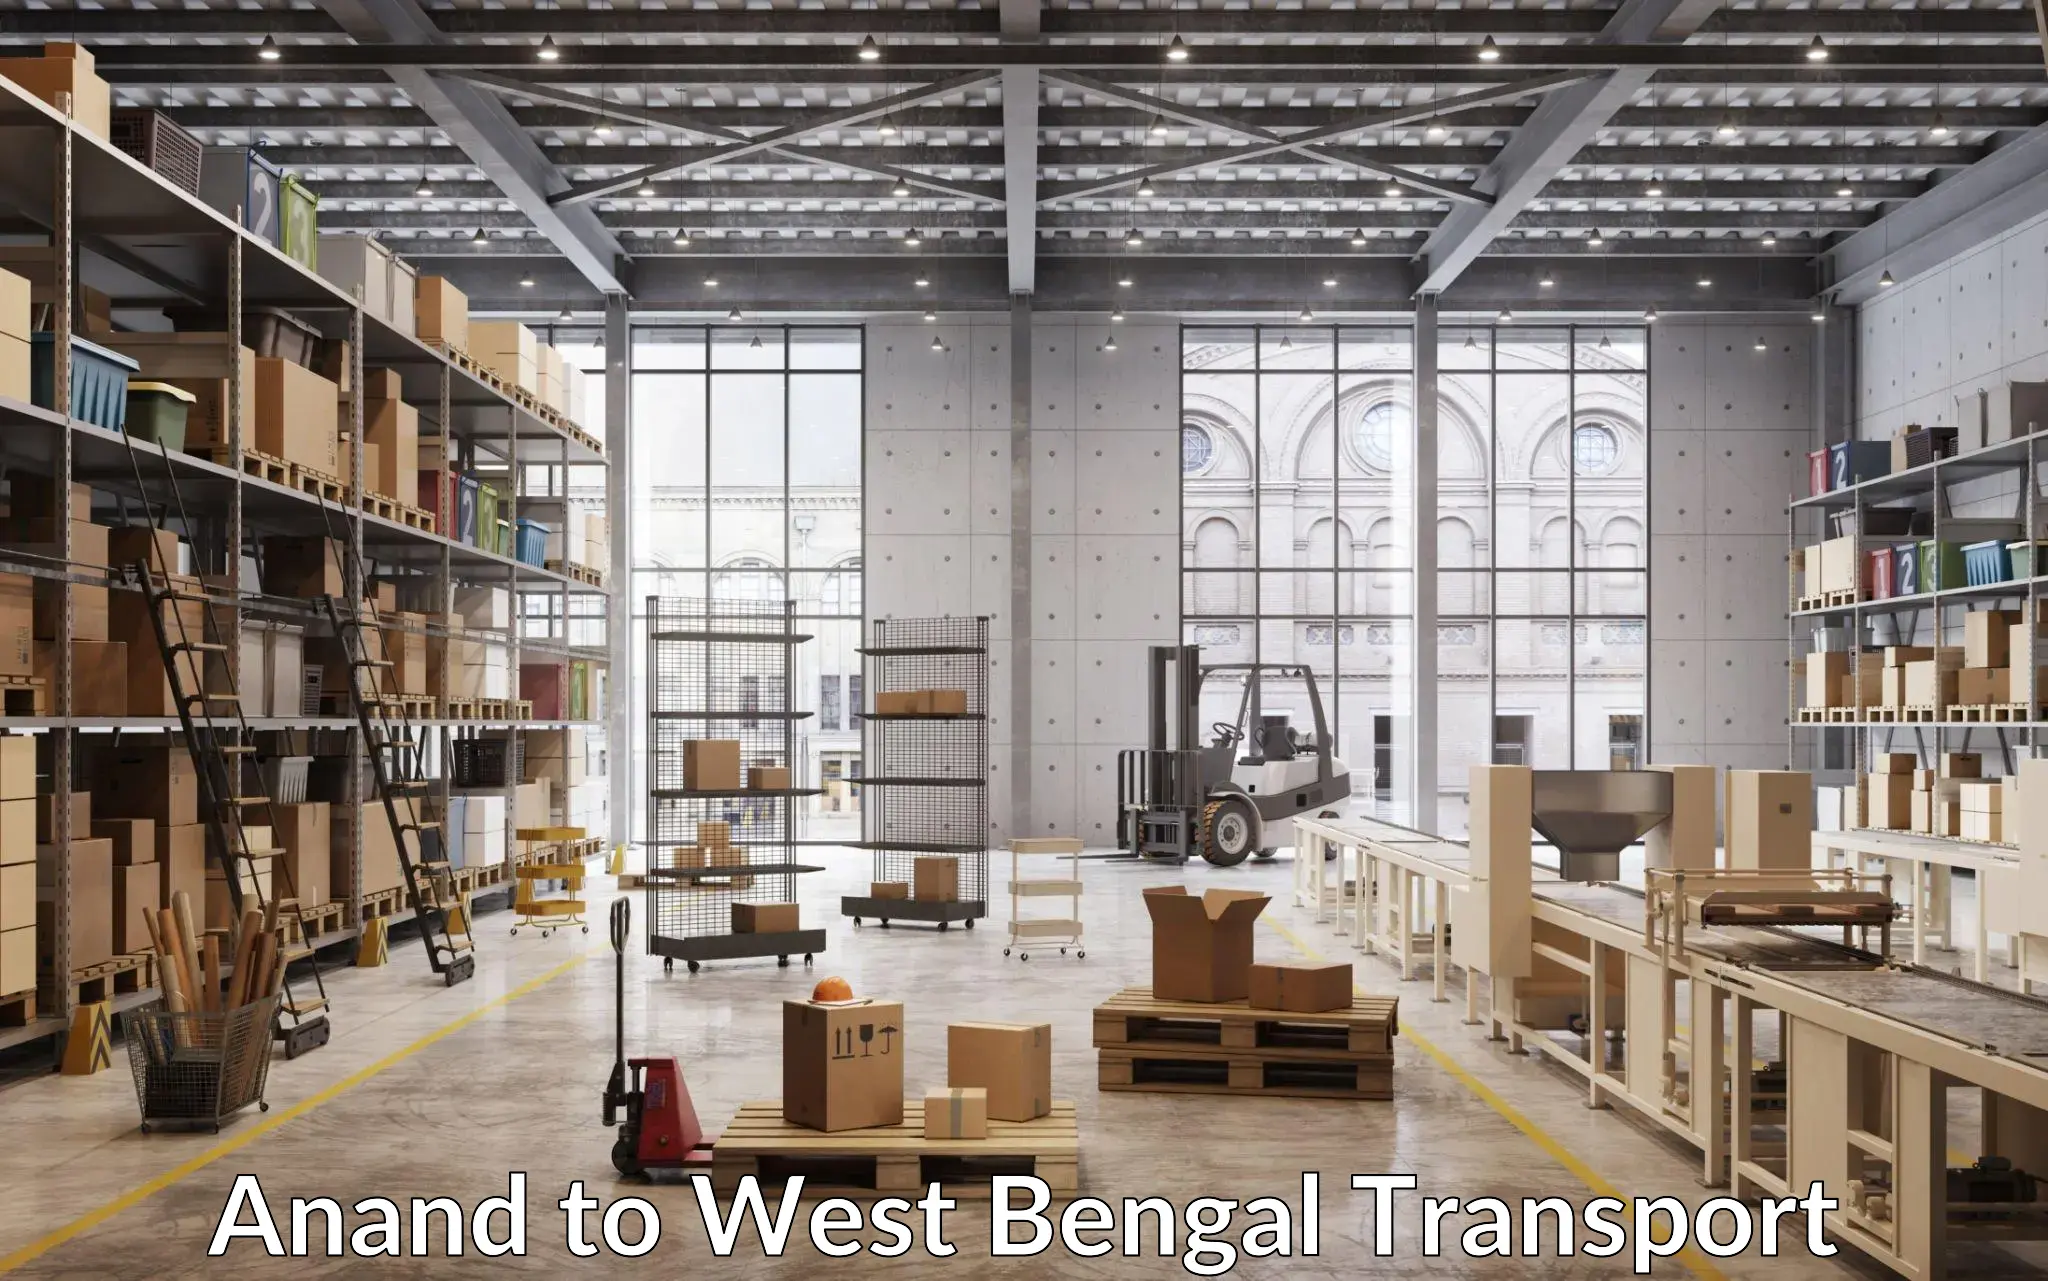 Nearby transport service Anand to West Bengal